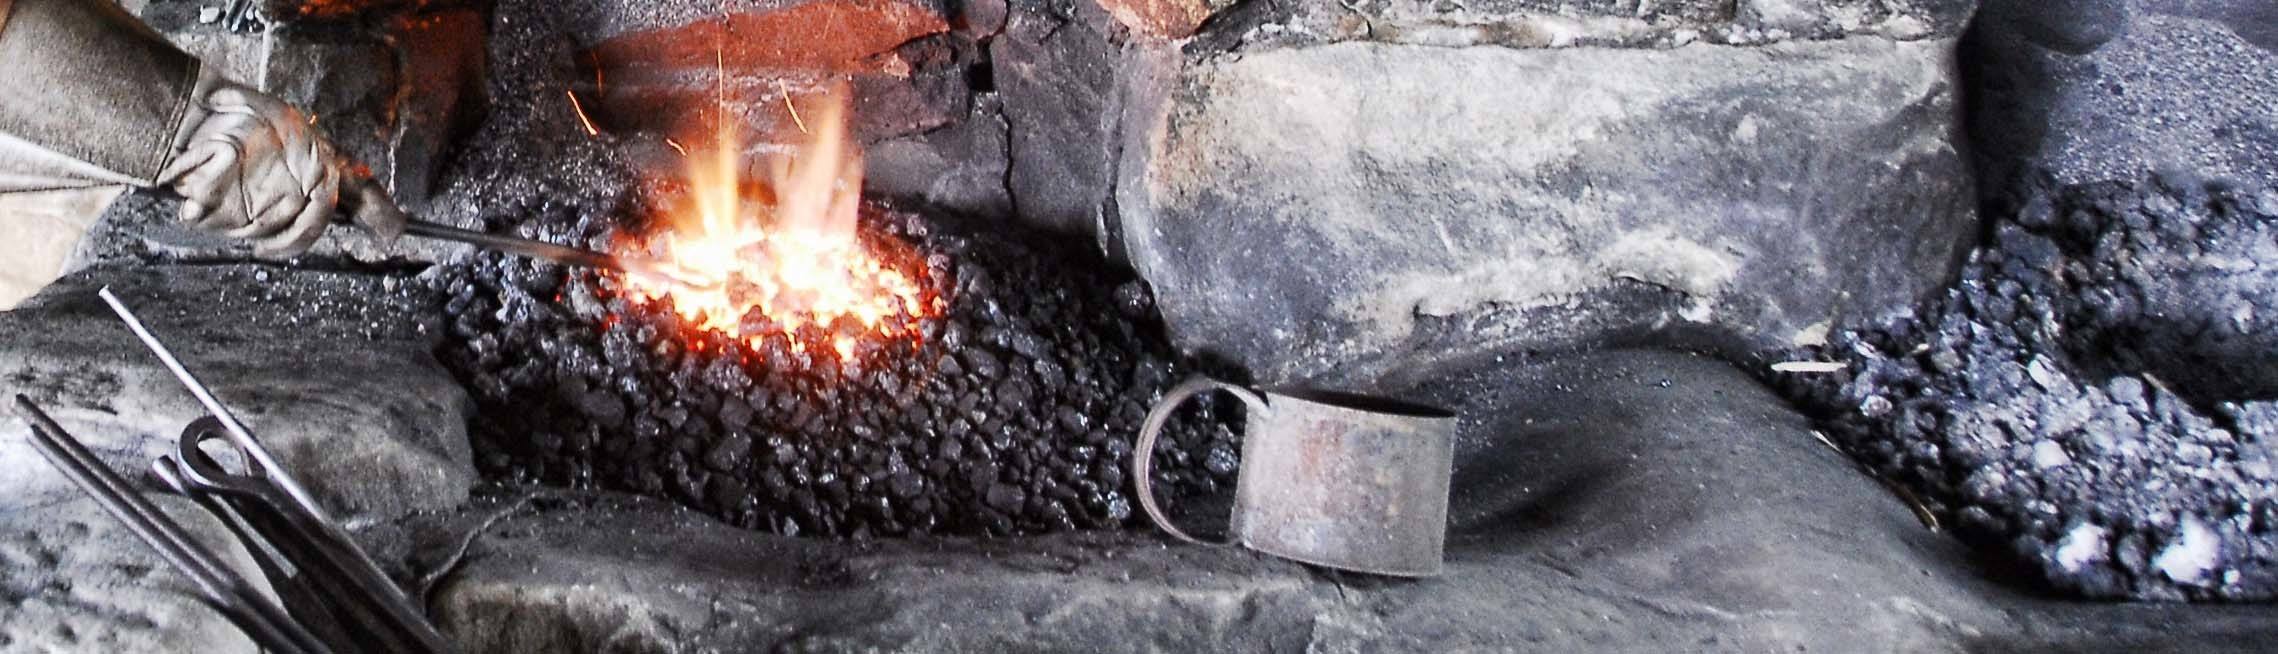 quenching oil for blacksmithing